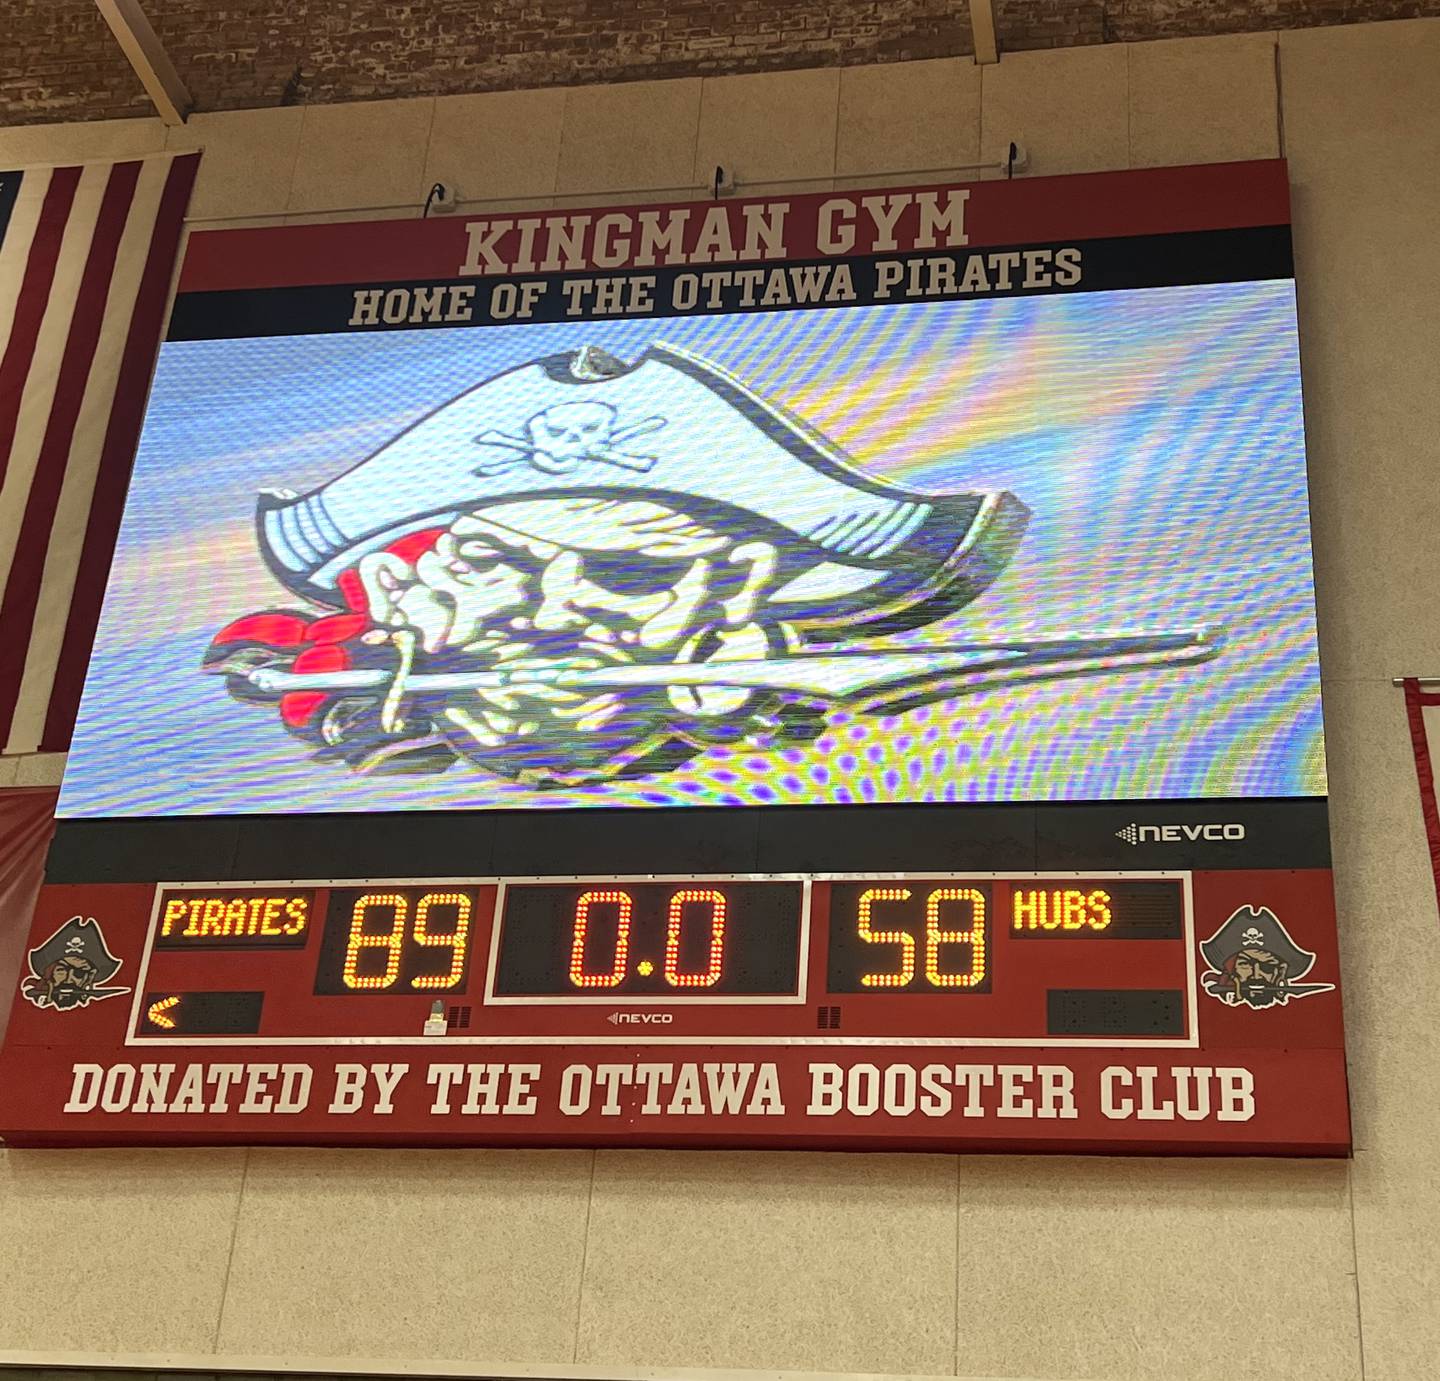 A new LED scoreboard was donated by the Ottawa High School Booster Club and installed in Kingman Gym on Friday, Aug.  12.